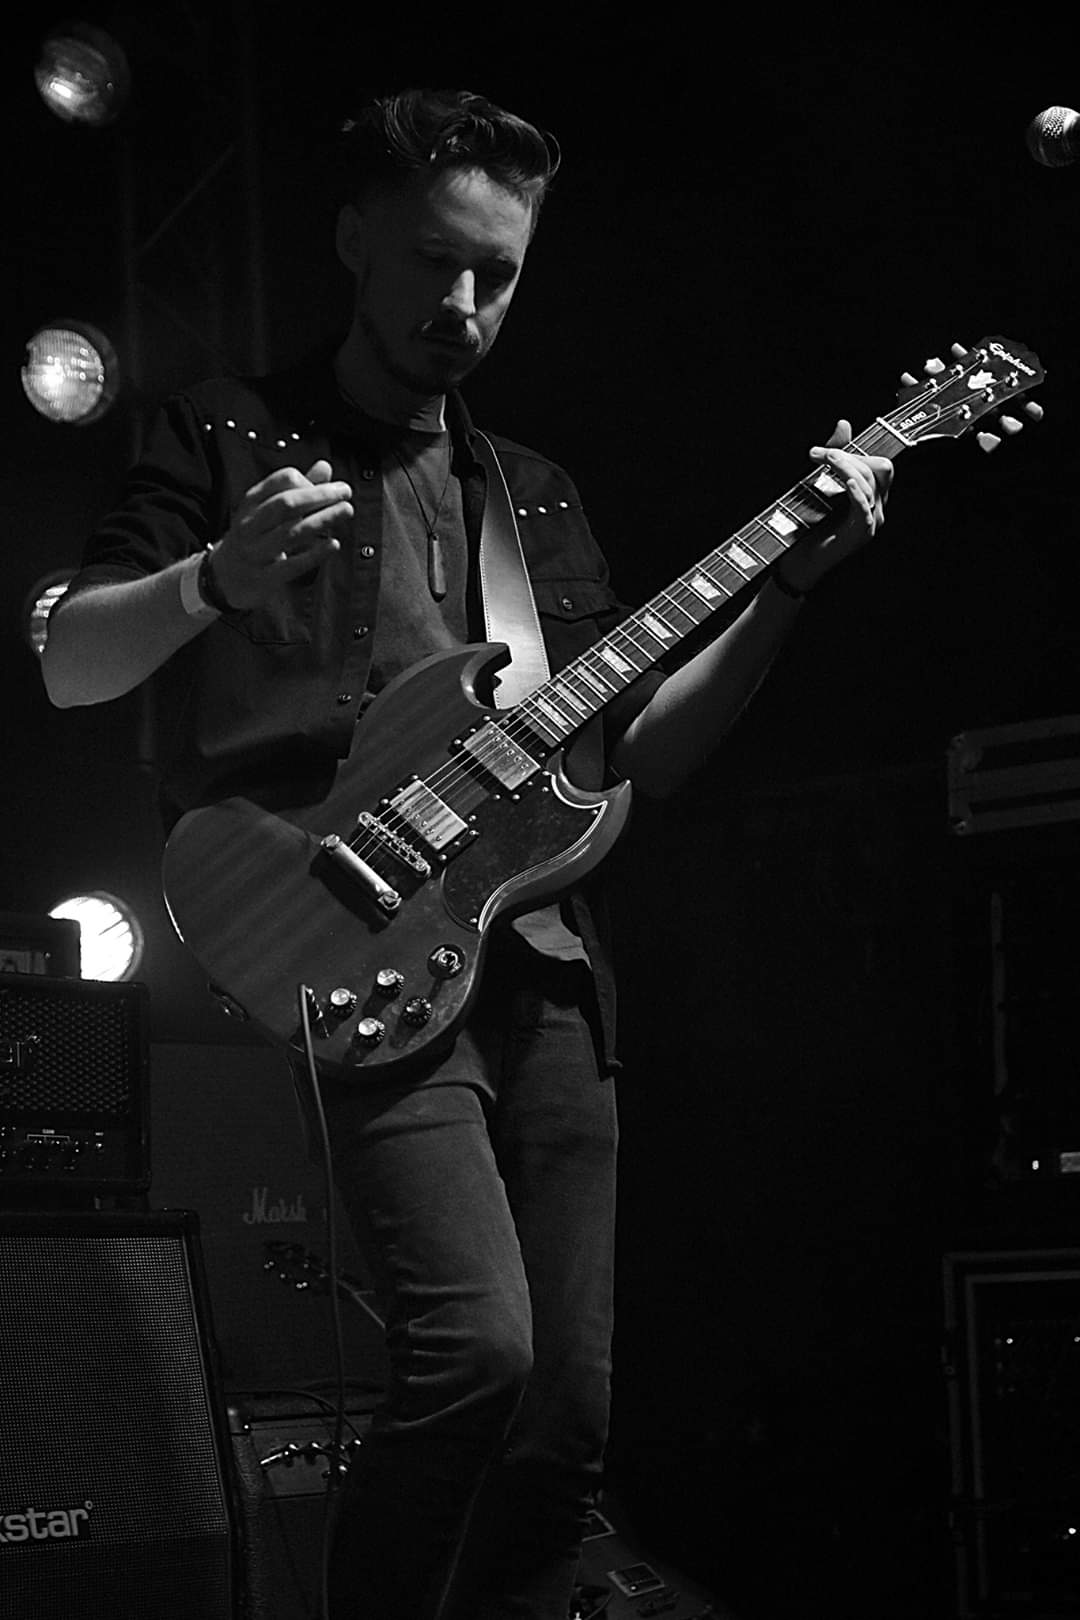 Andy playing guitar at Livewire